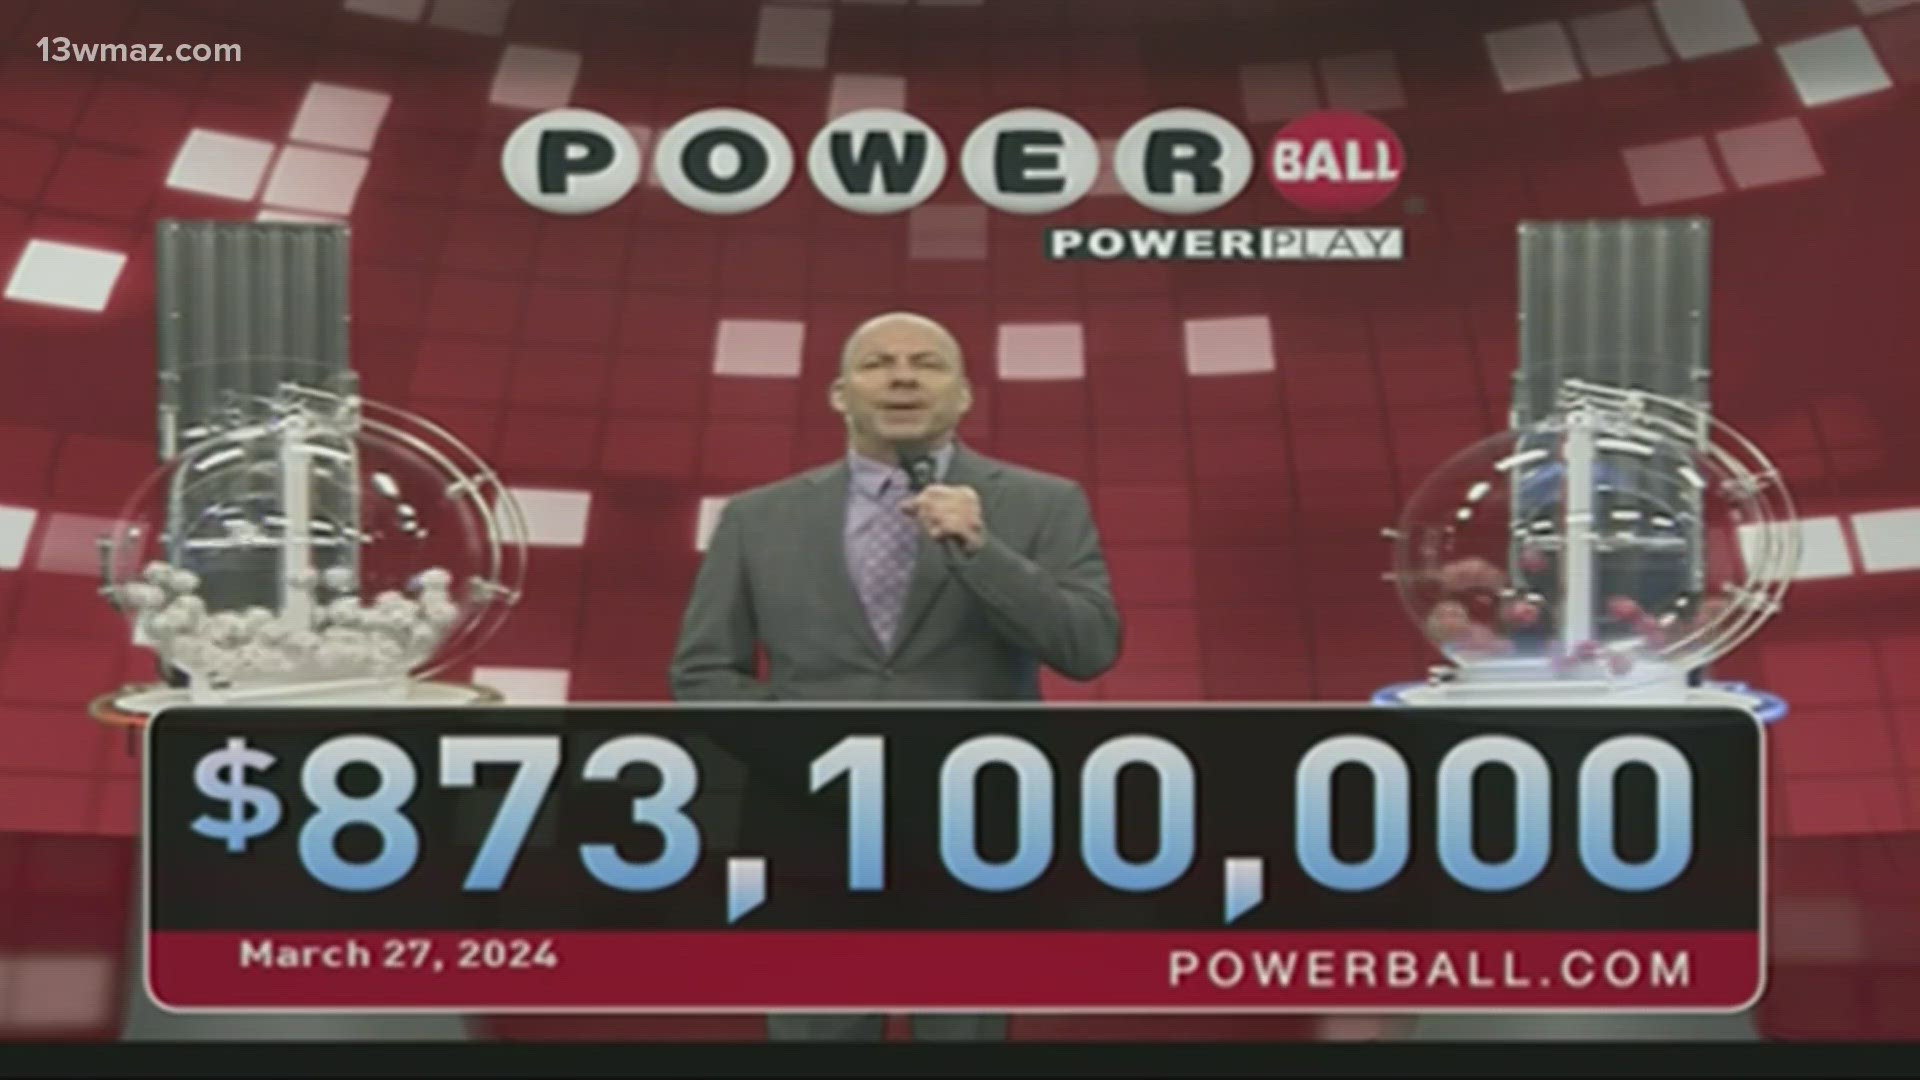 Here are your winning Powerball Numbers for March 27, 2024's $873.1 million jackpot. What would you do with that kind of money?